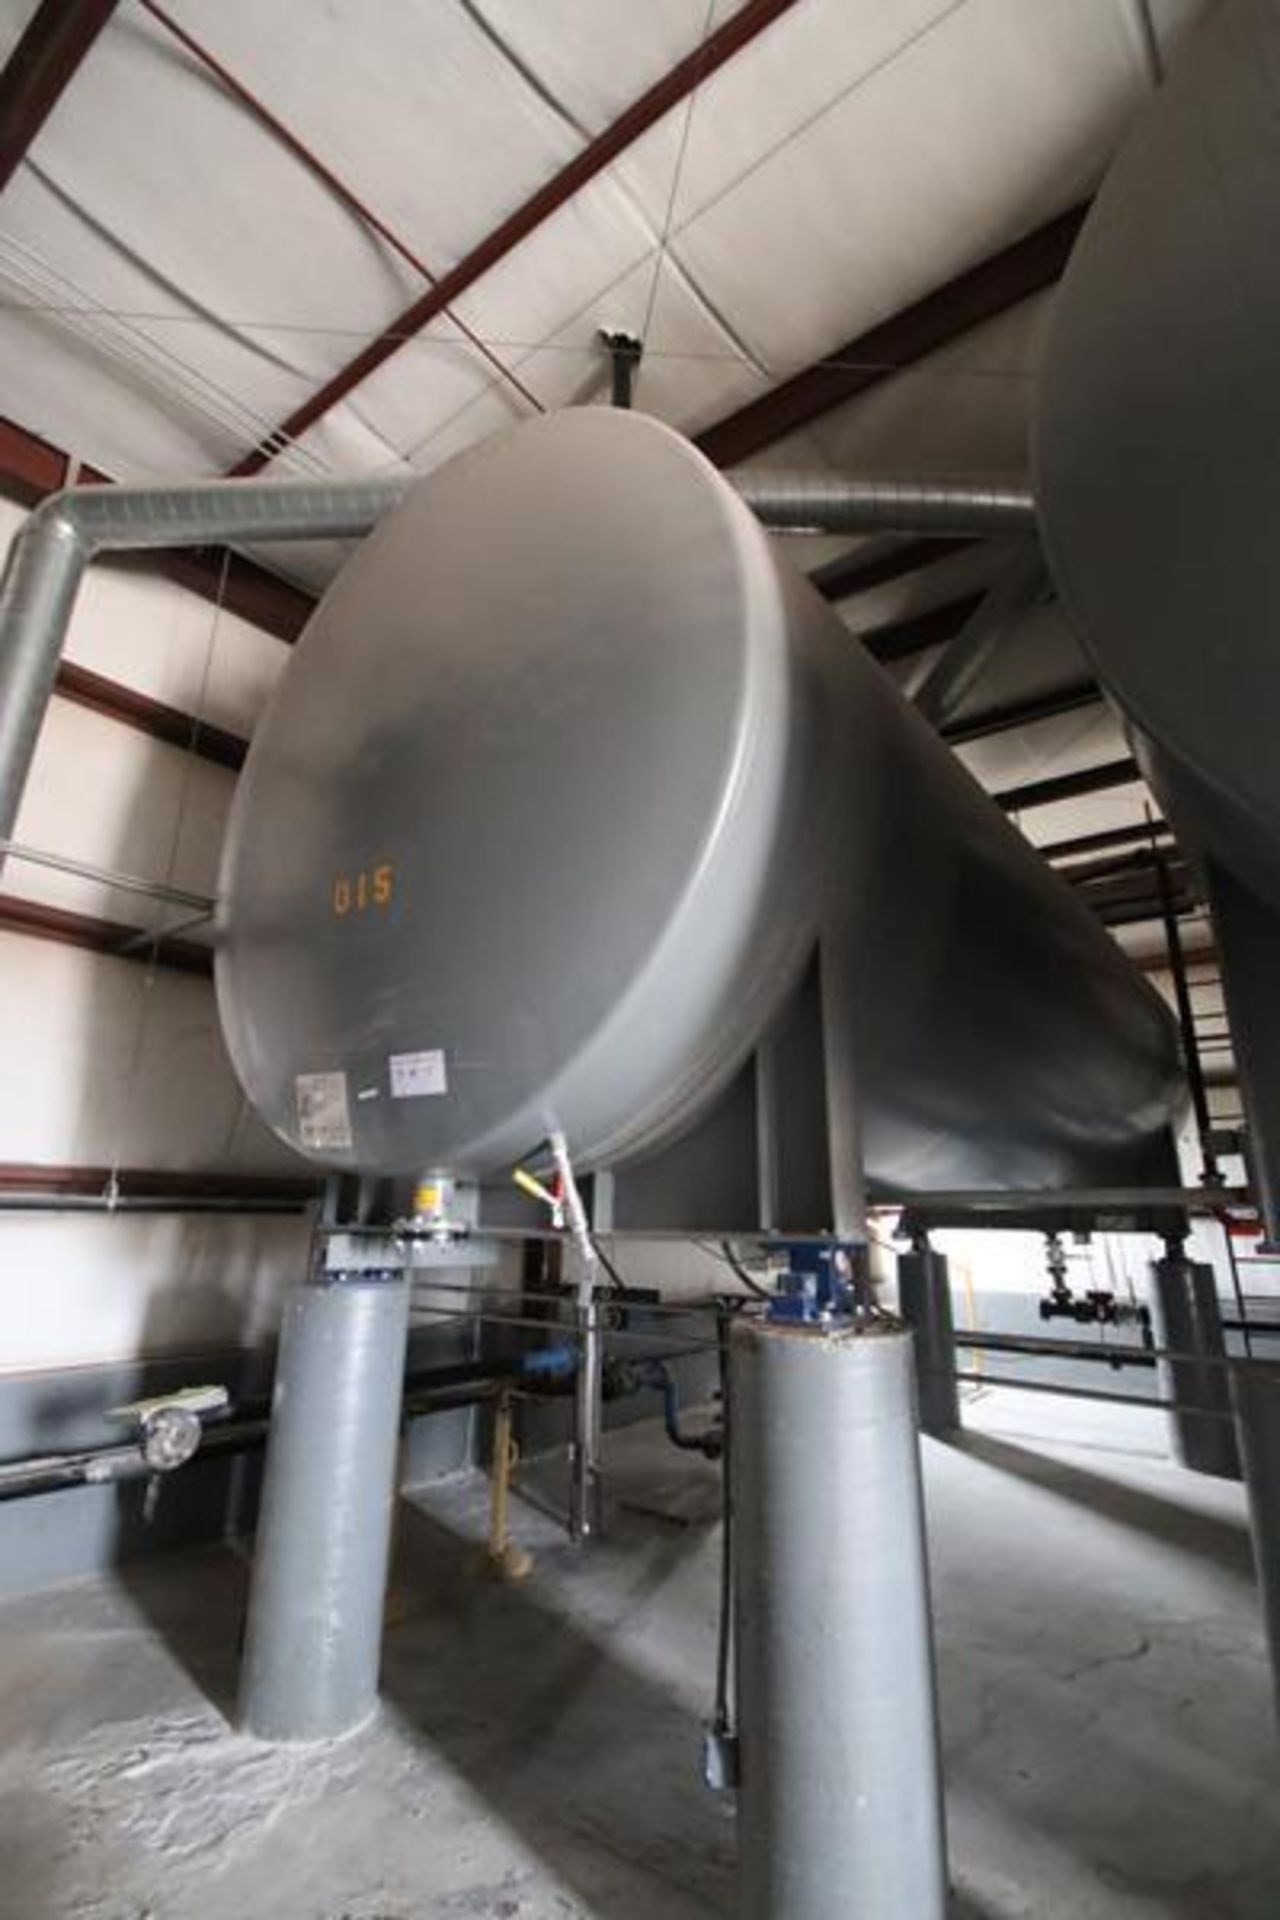 Approx. 10,000 gallon carbon steel horizontal storage tanks. Dished heads, on welded steel